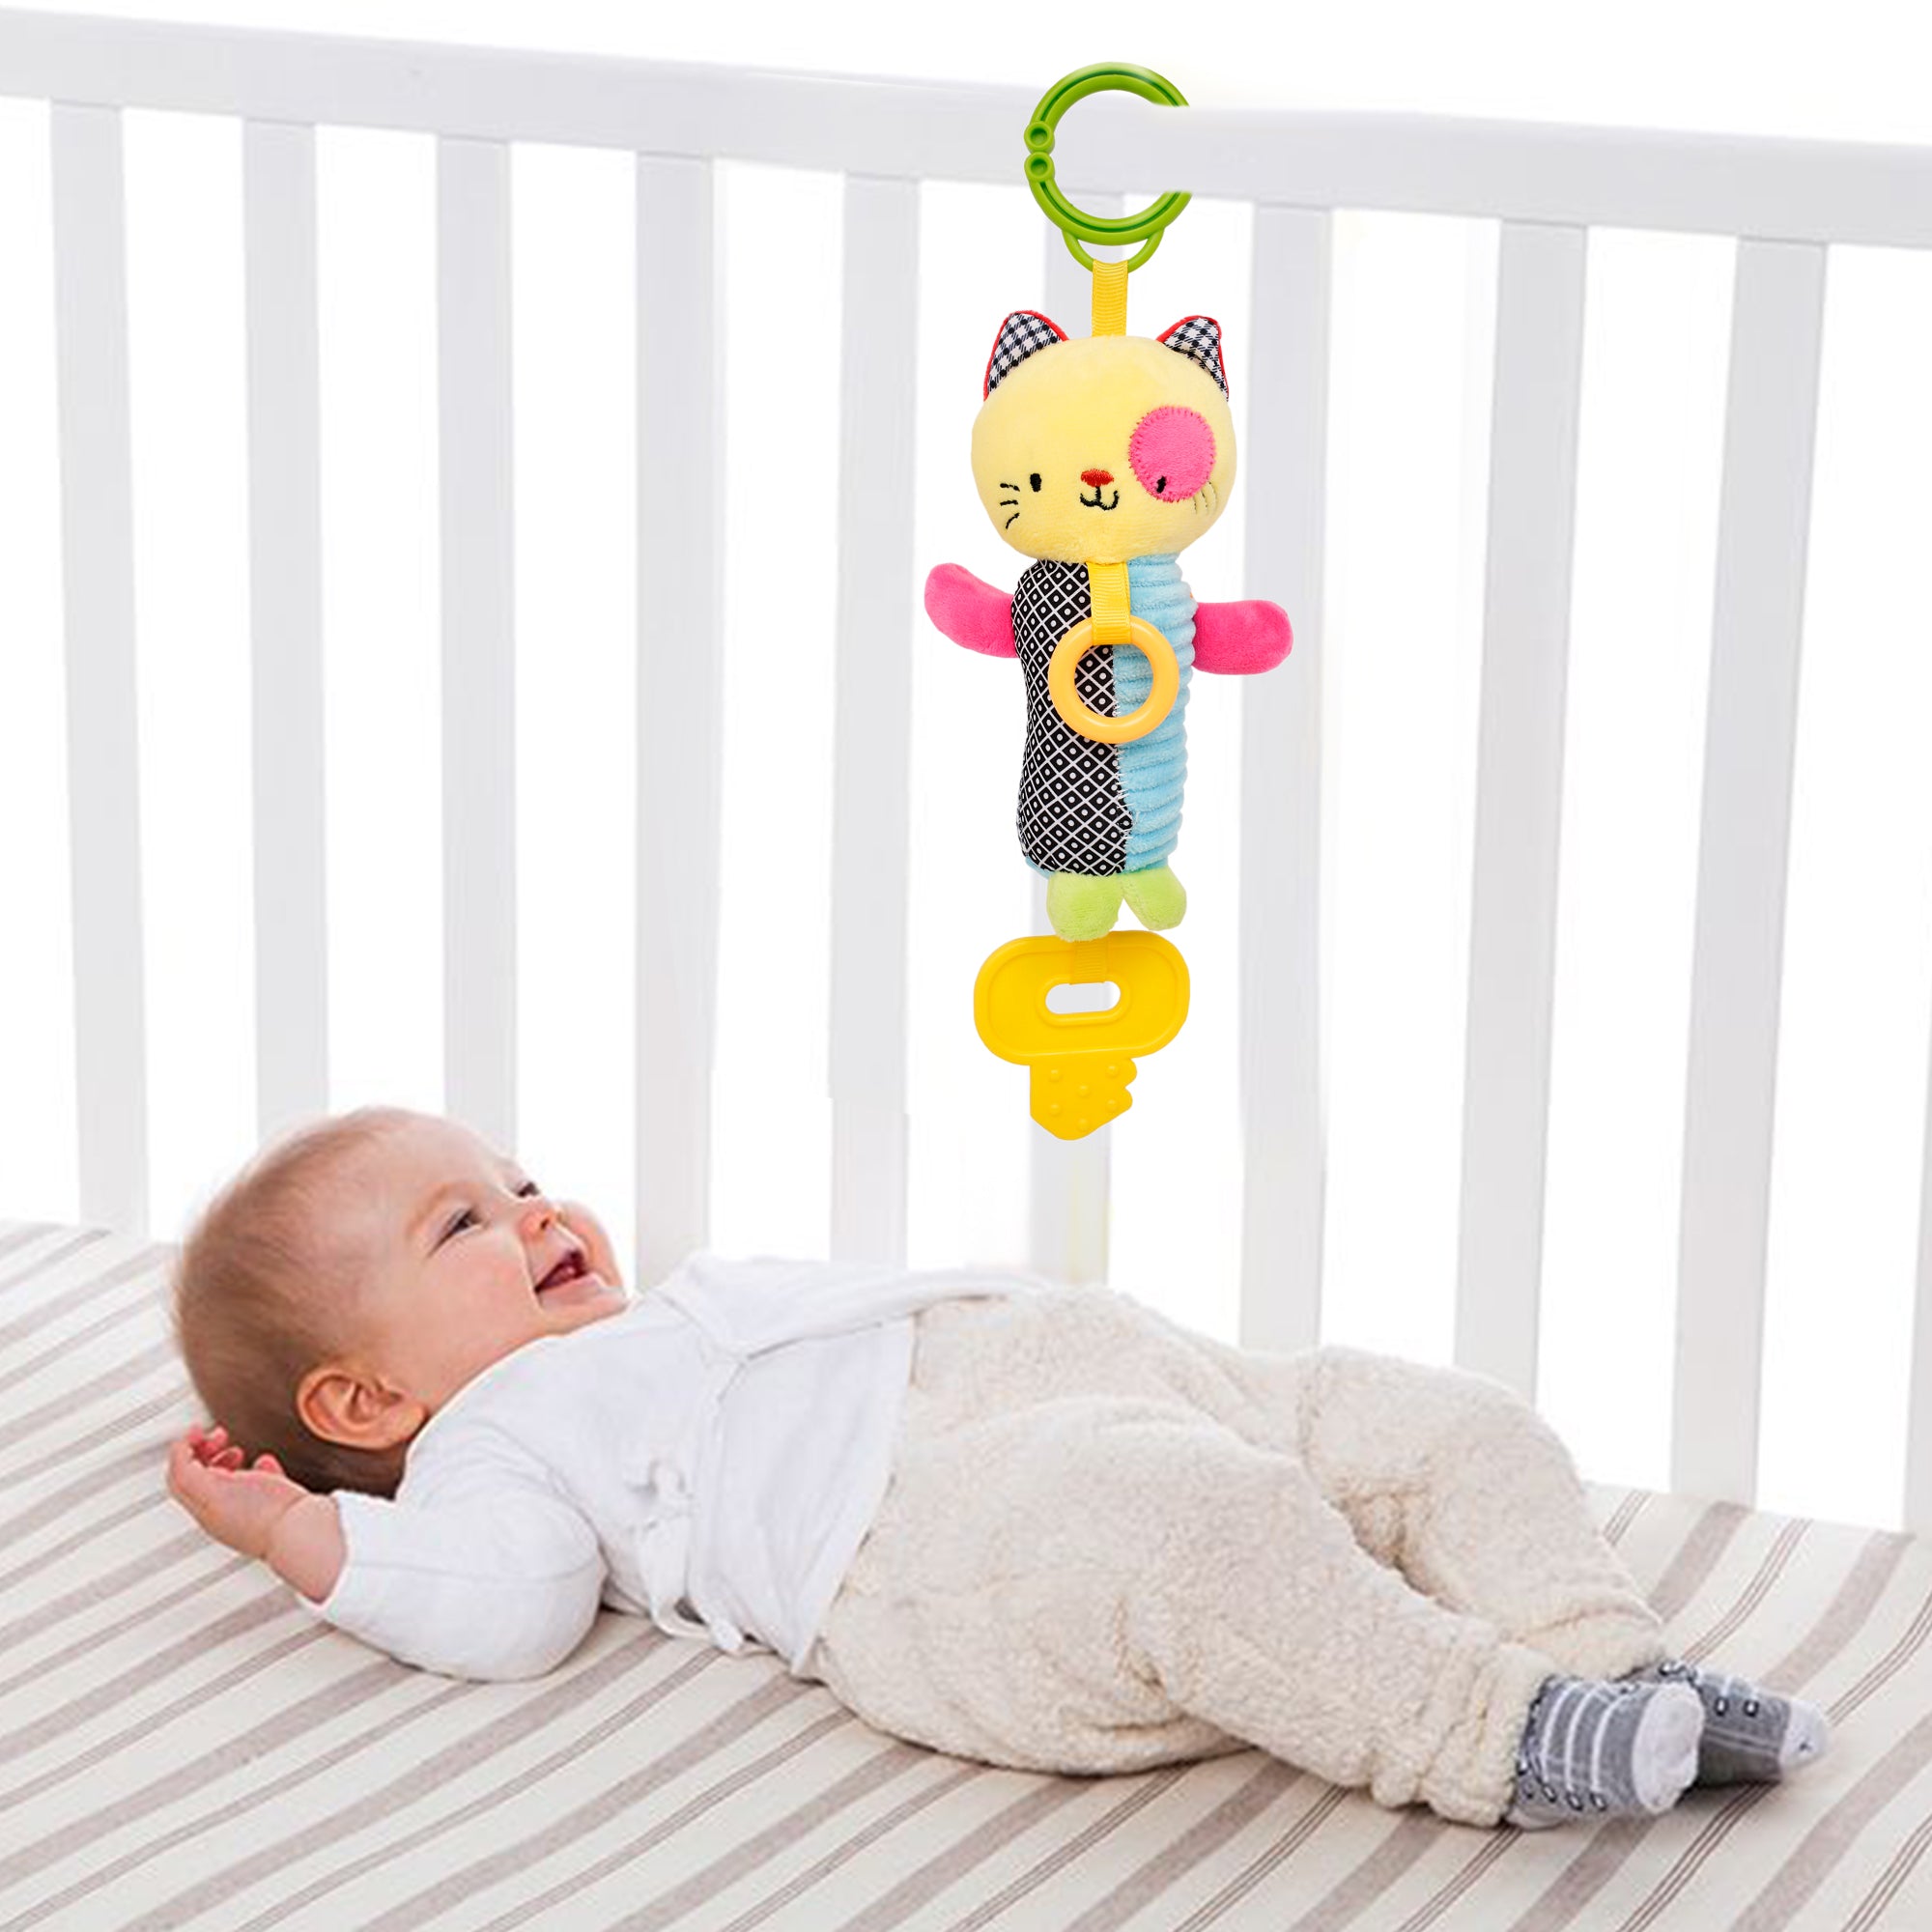 Mr. Patches Yellow Hanging Toy With Teether